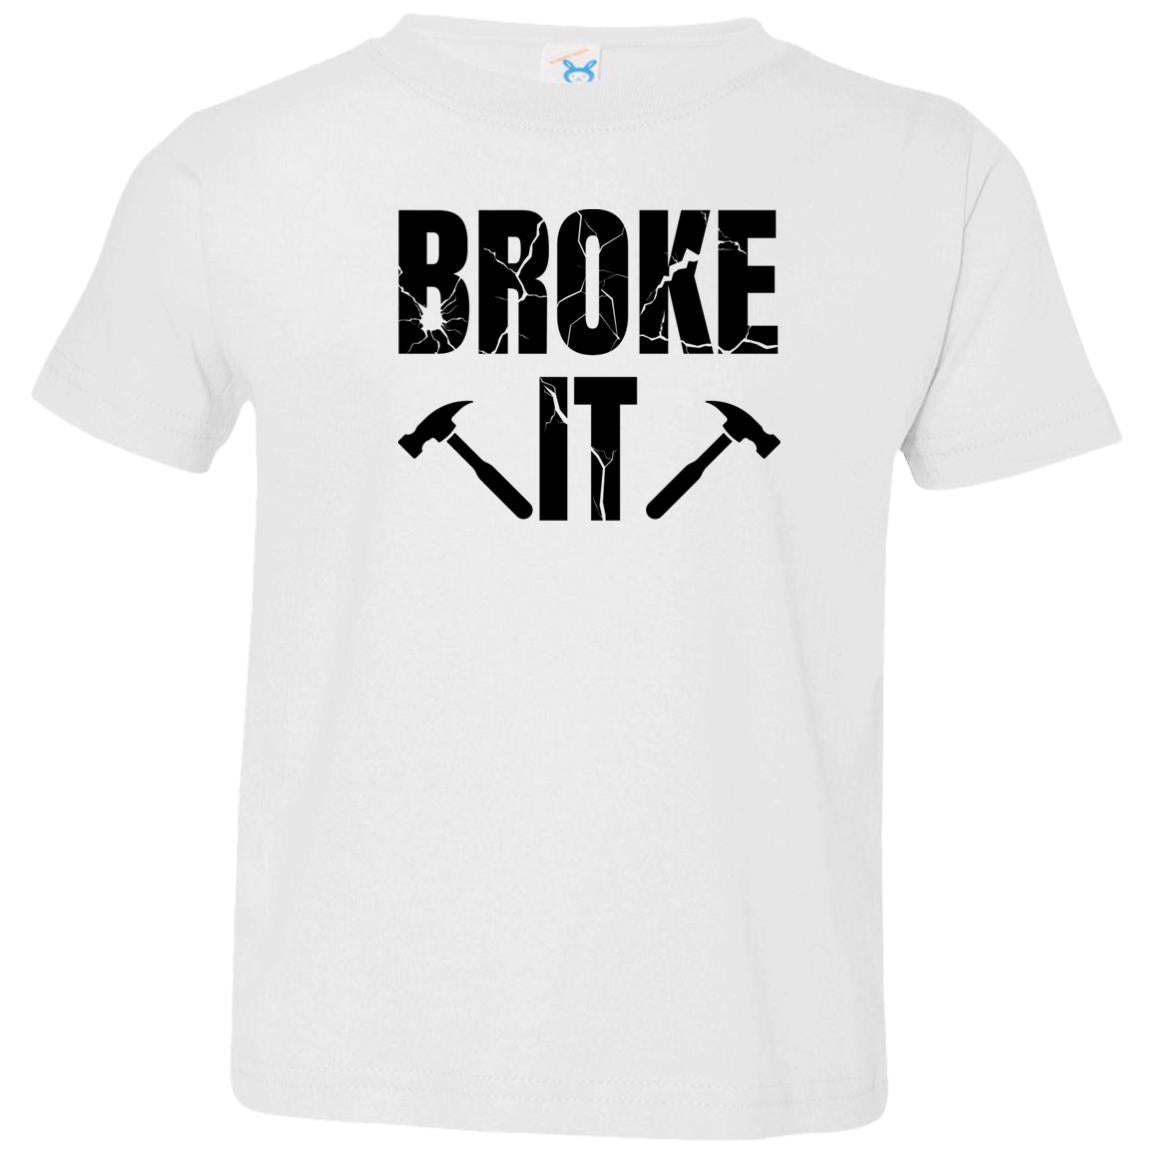 Broke It-Fixed It | Dad-Toddler T-Shirts